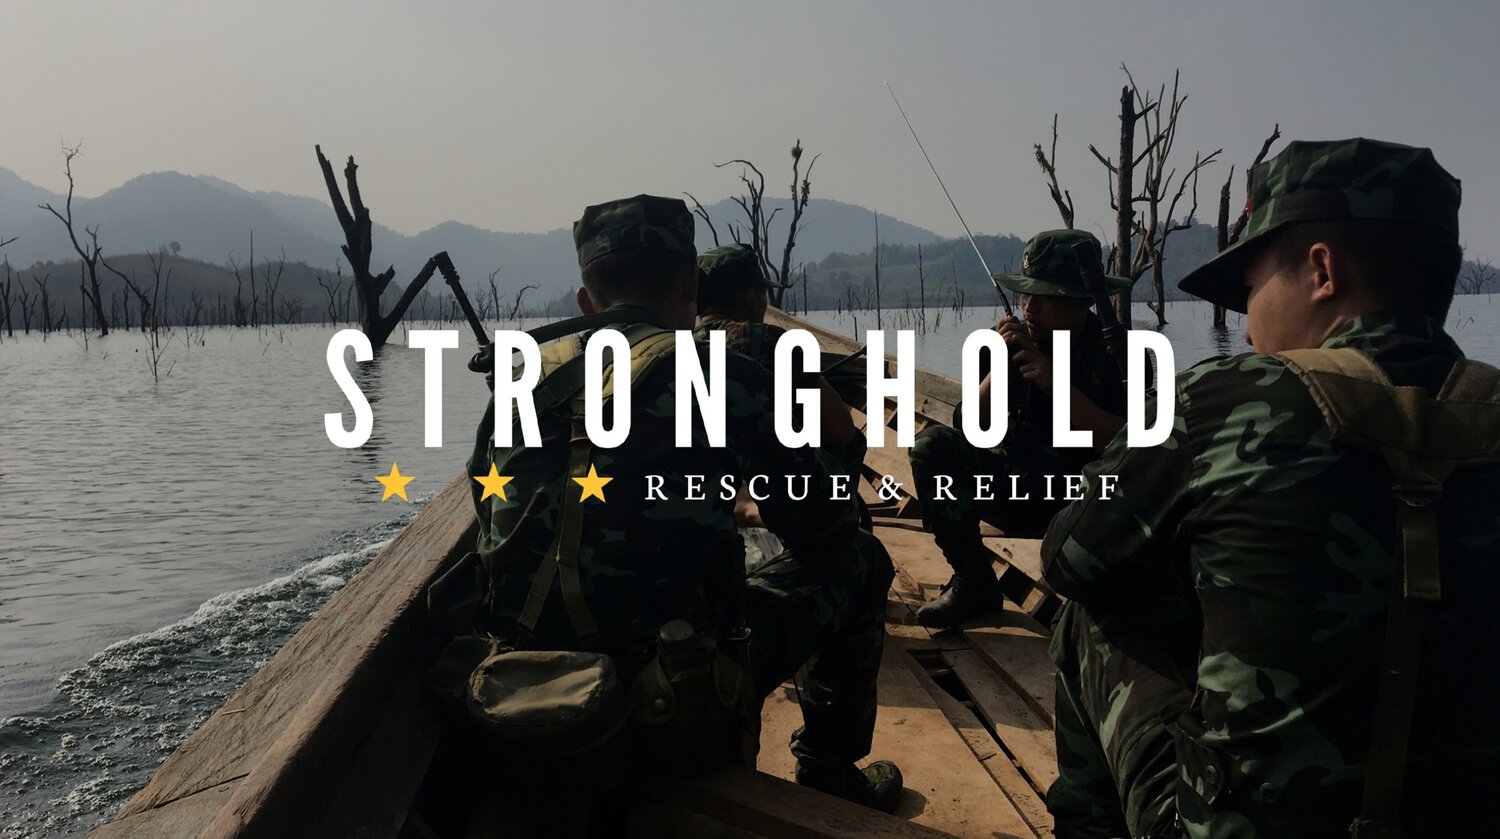 strongholdrescue.org